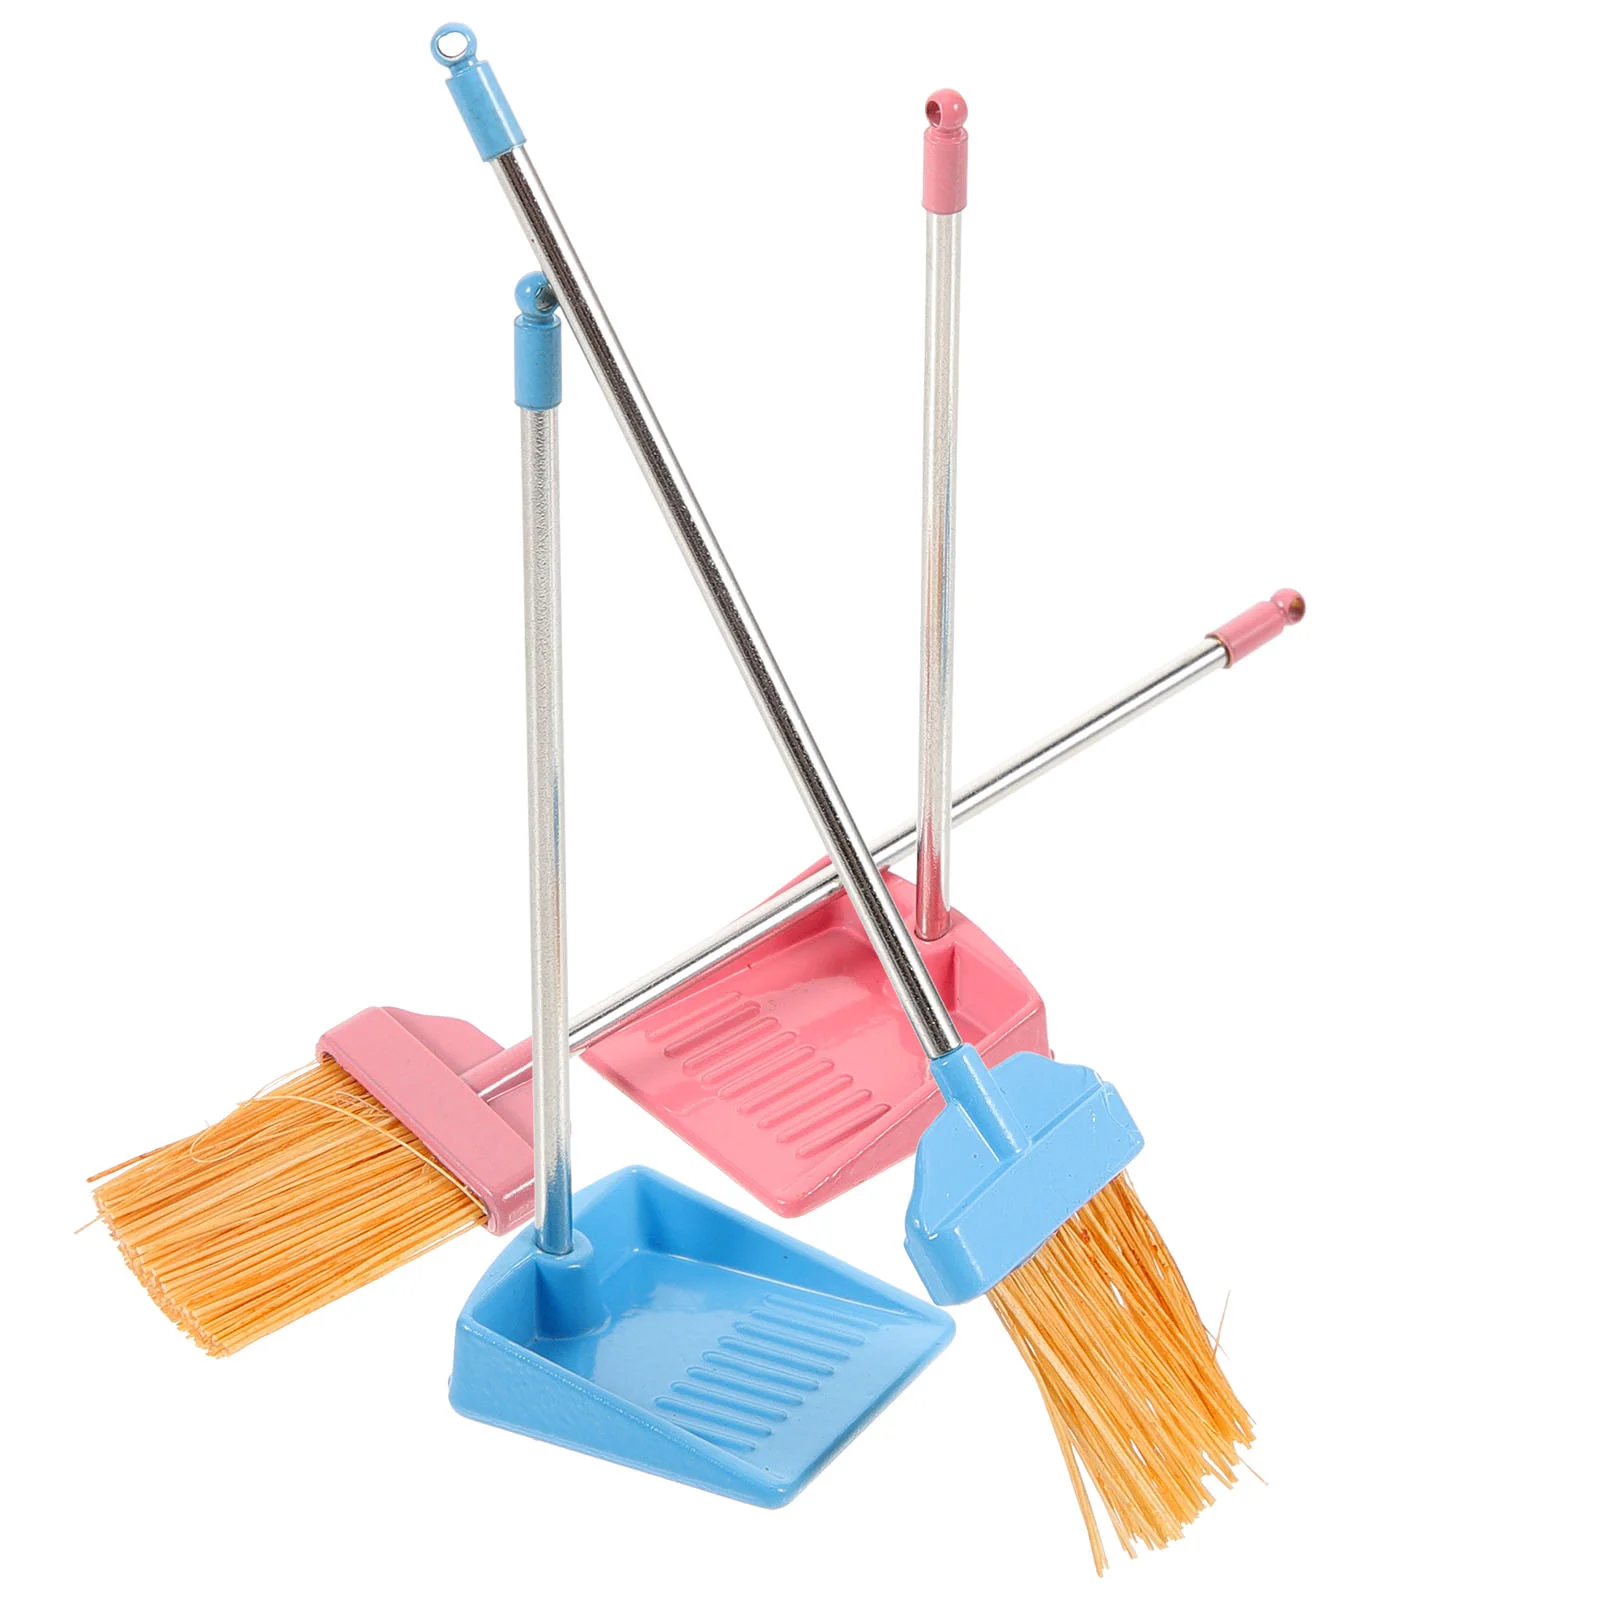 

2 Sets Small House Decor Dustpan Broom Figurines Simulation Brooms Miniature Cleaning Tool Playhouse Furniture Model Props